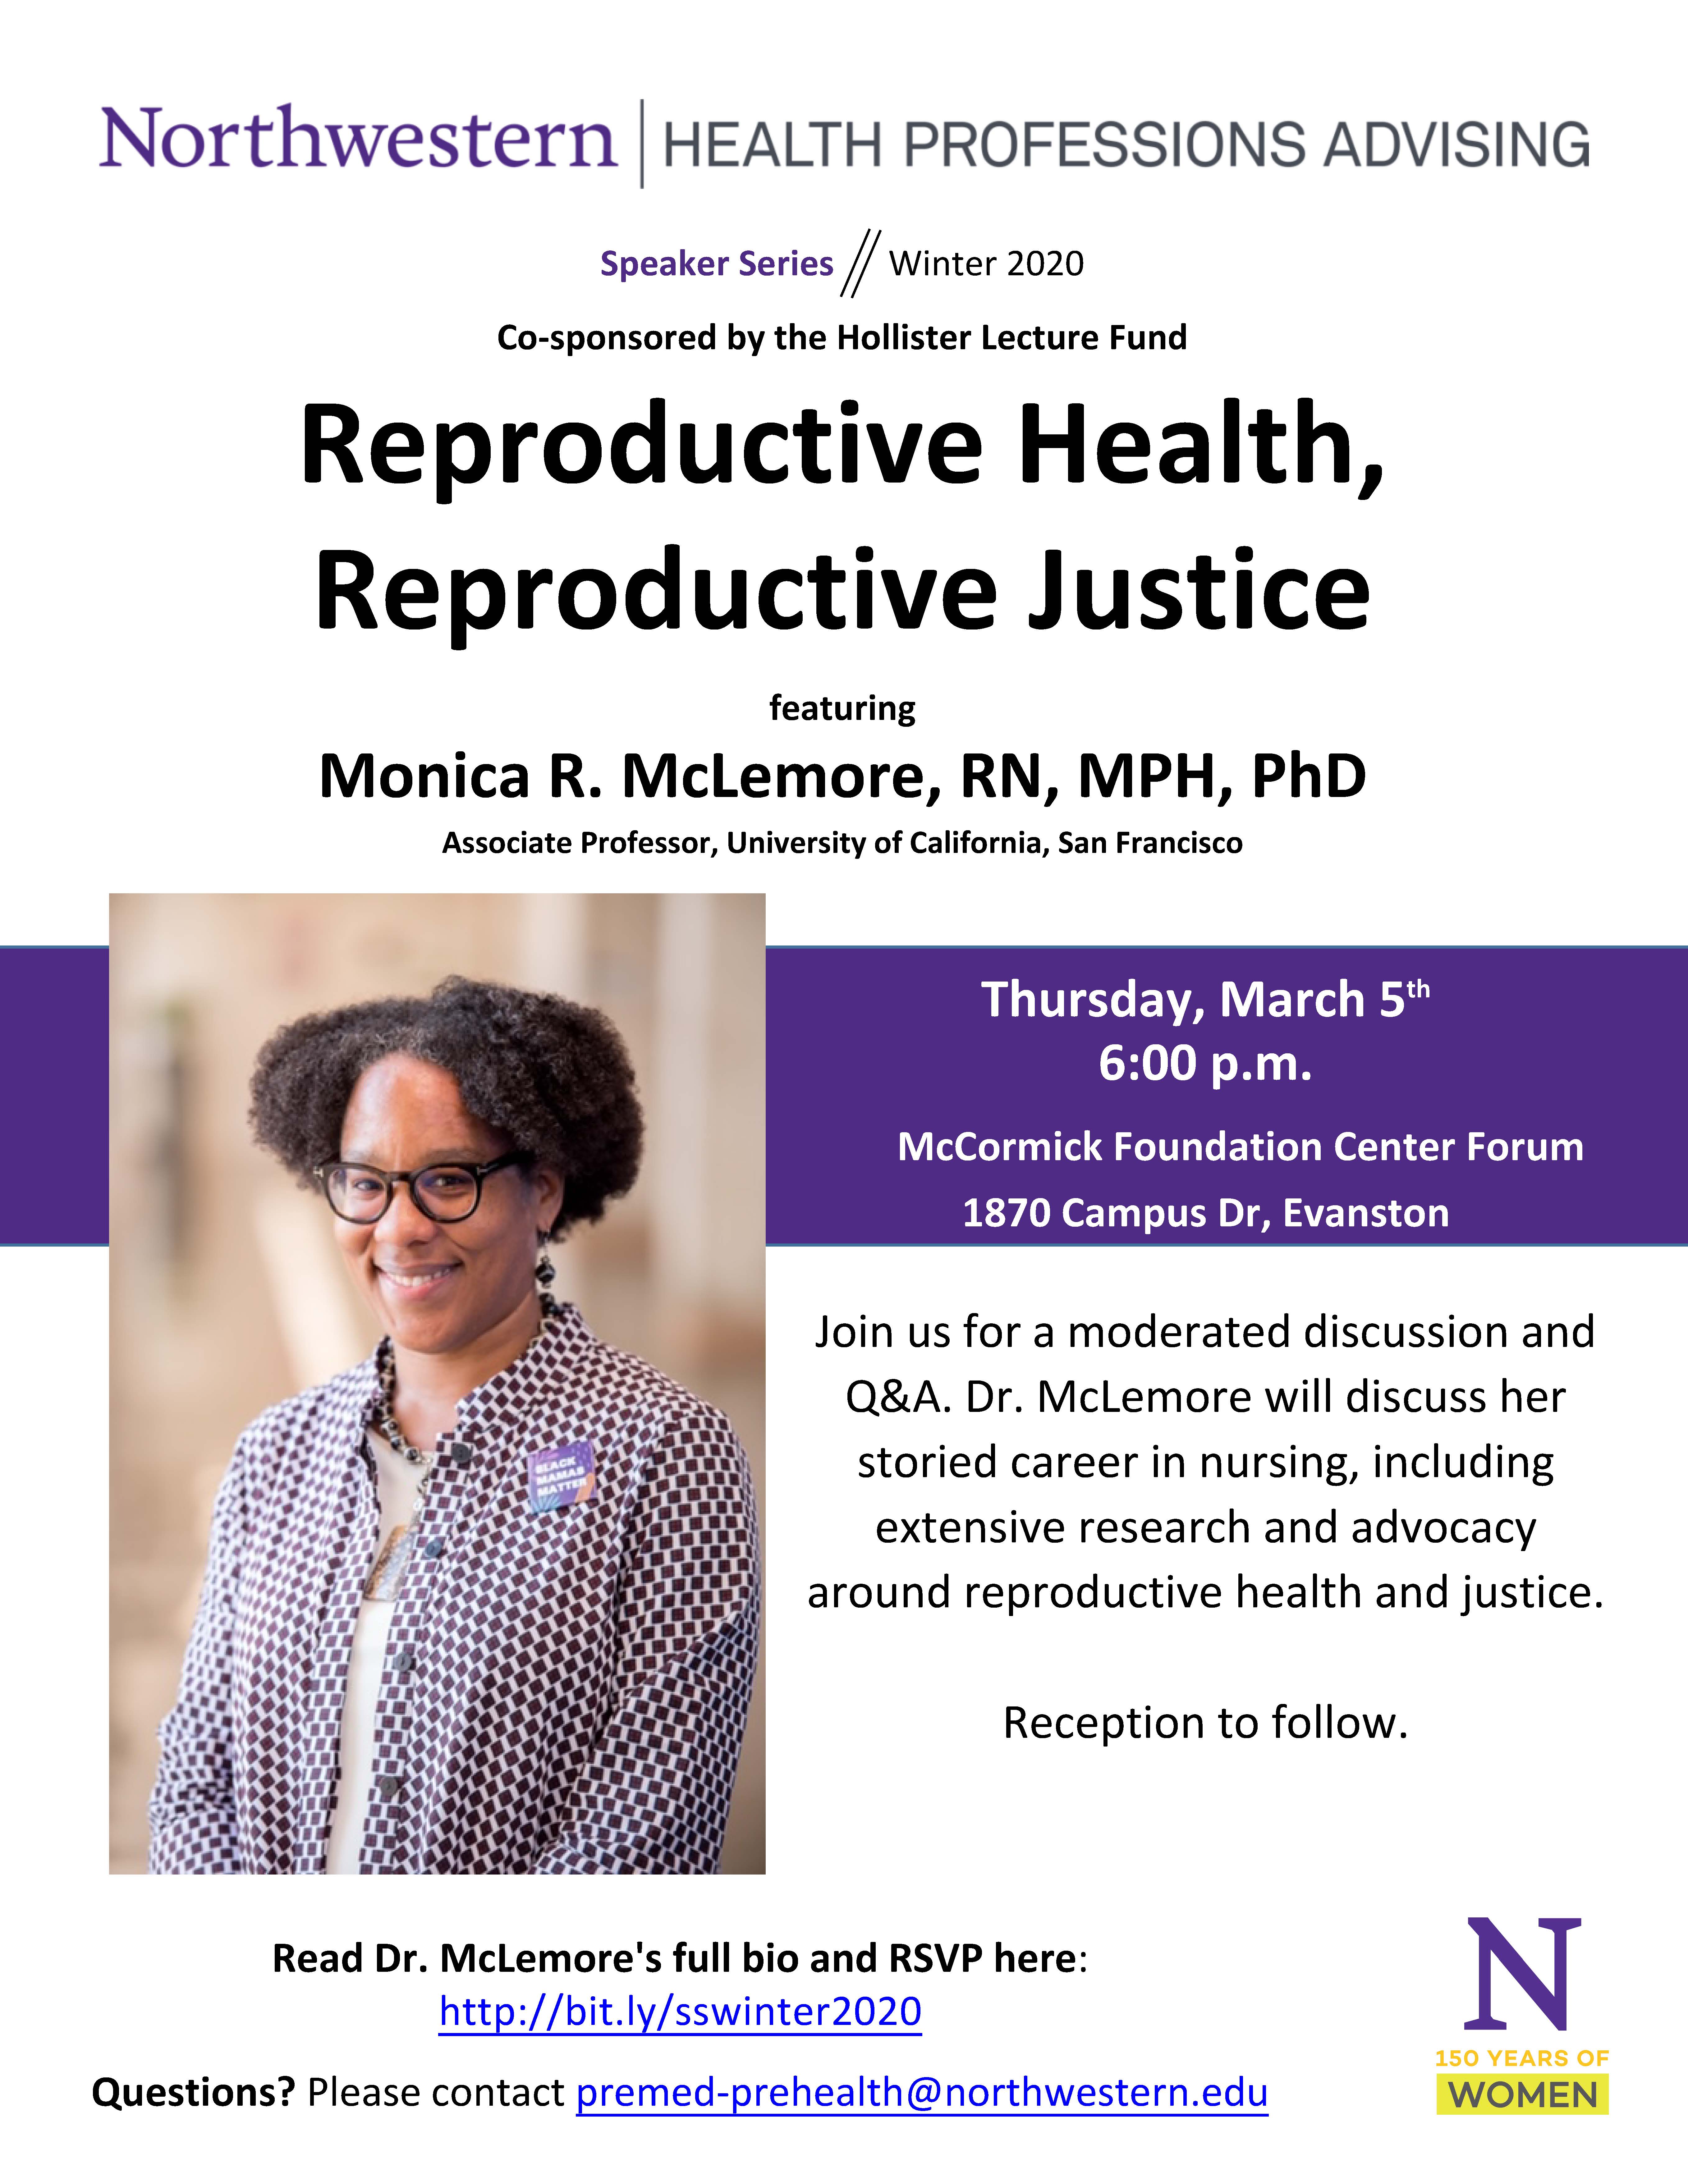 Reproductive Health, Reproductive Justice